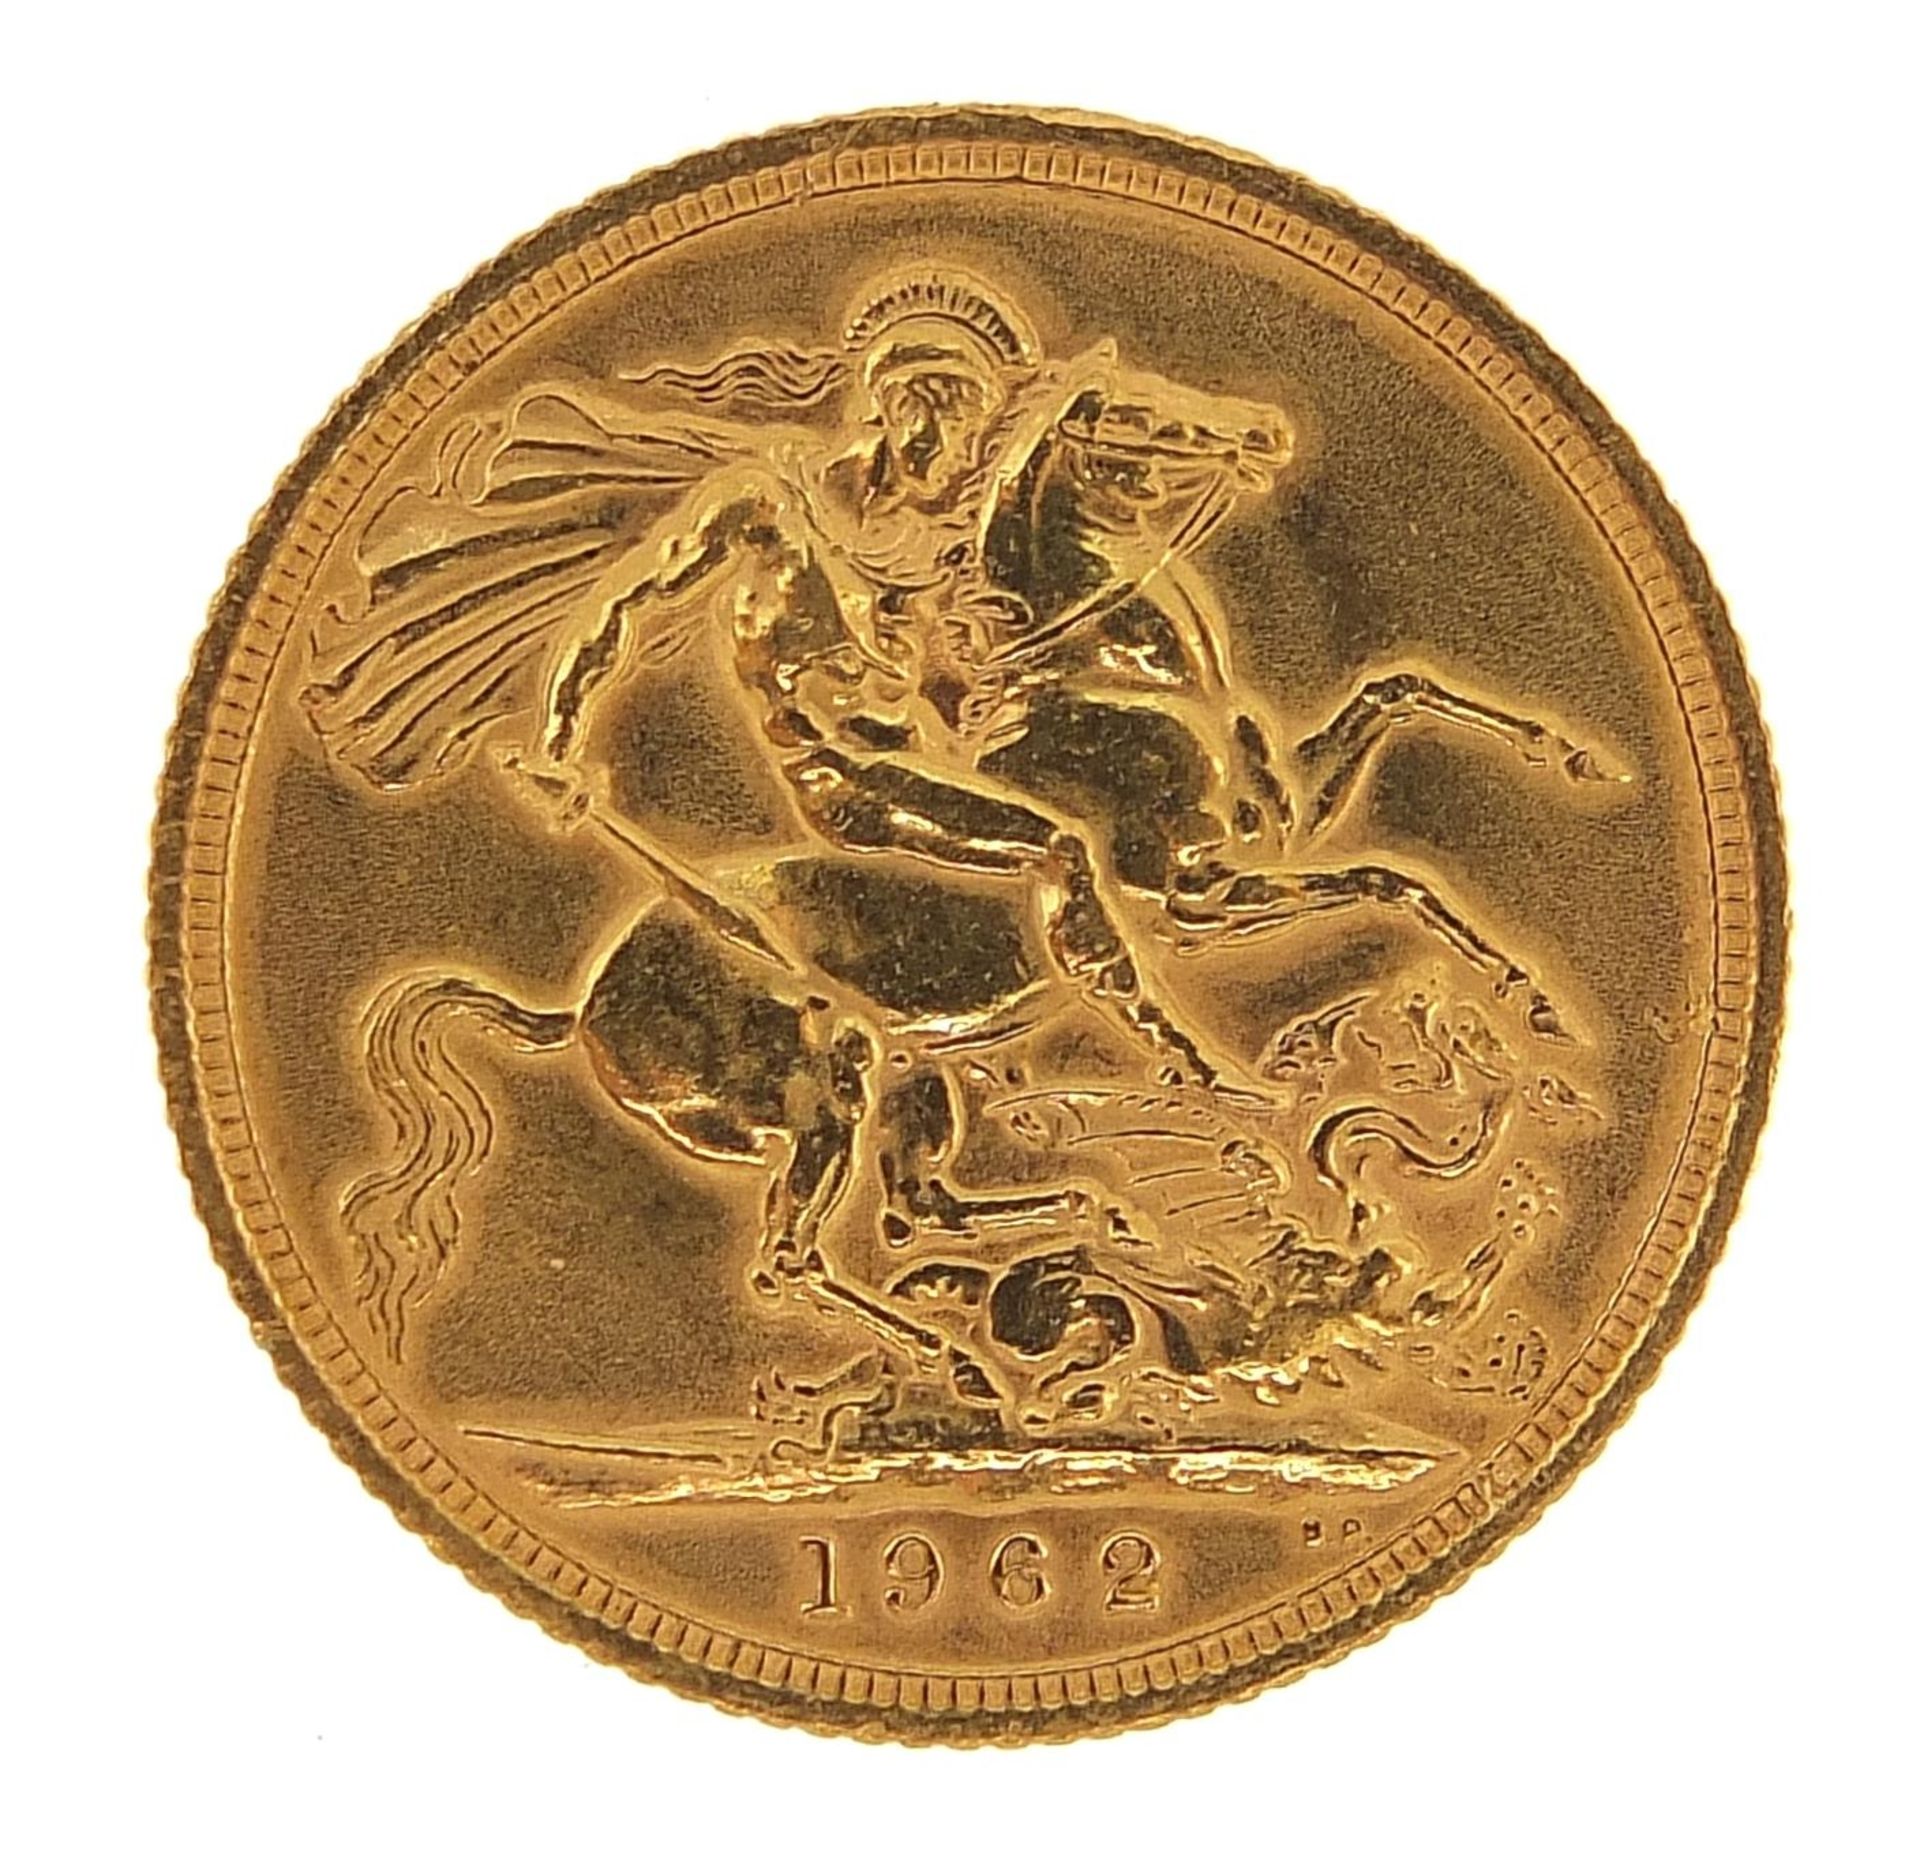 Elizabeth II 1962 gold sovereign - this lot is sold without buyer's premium